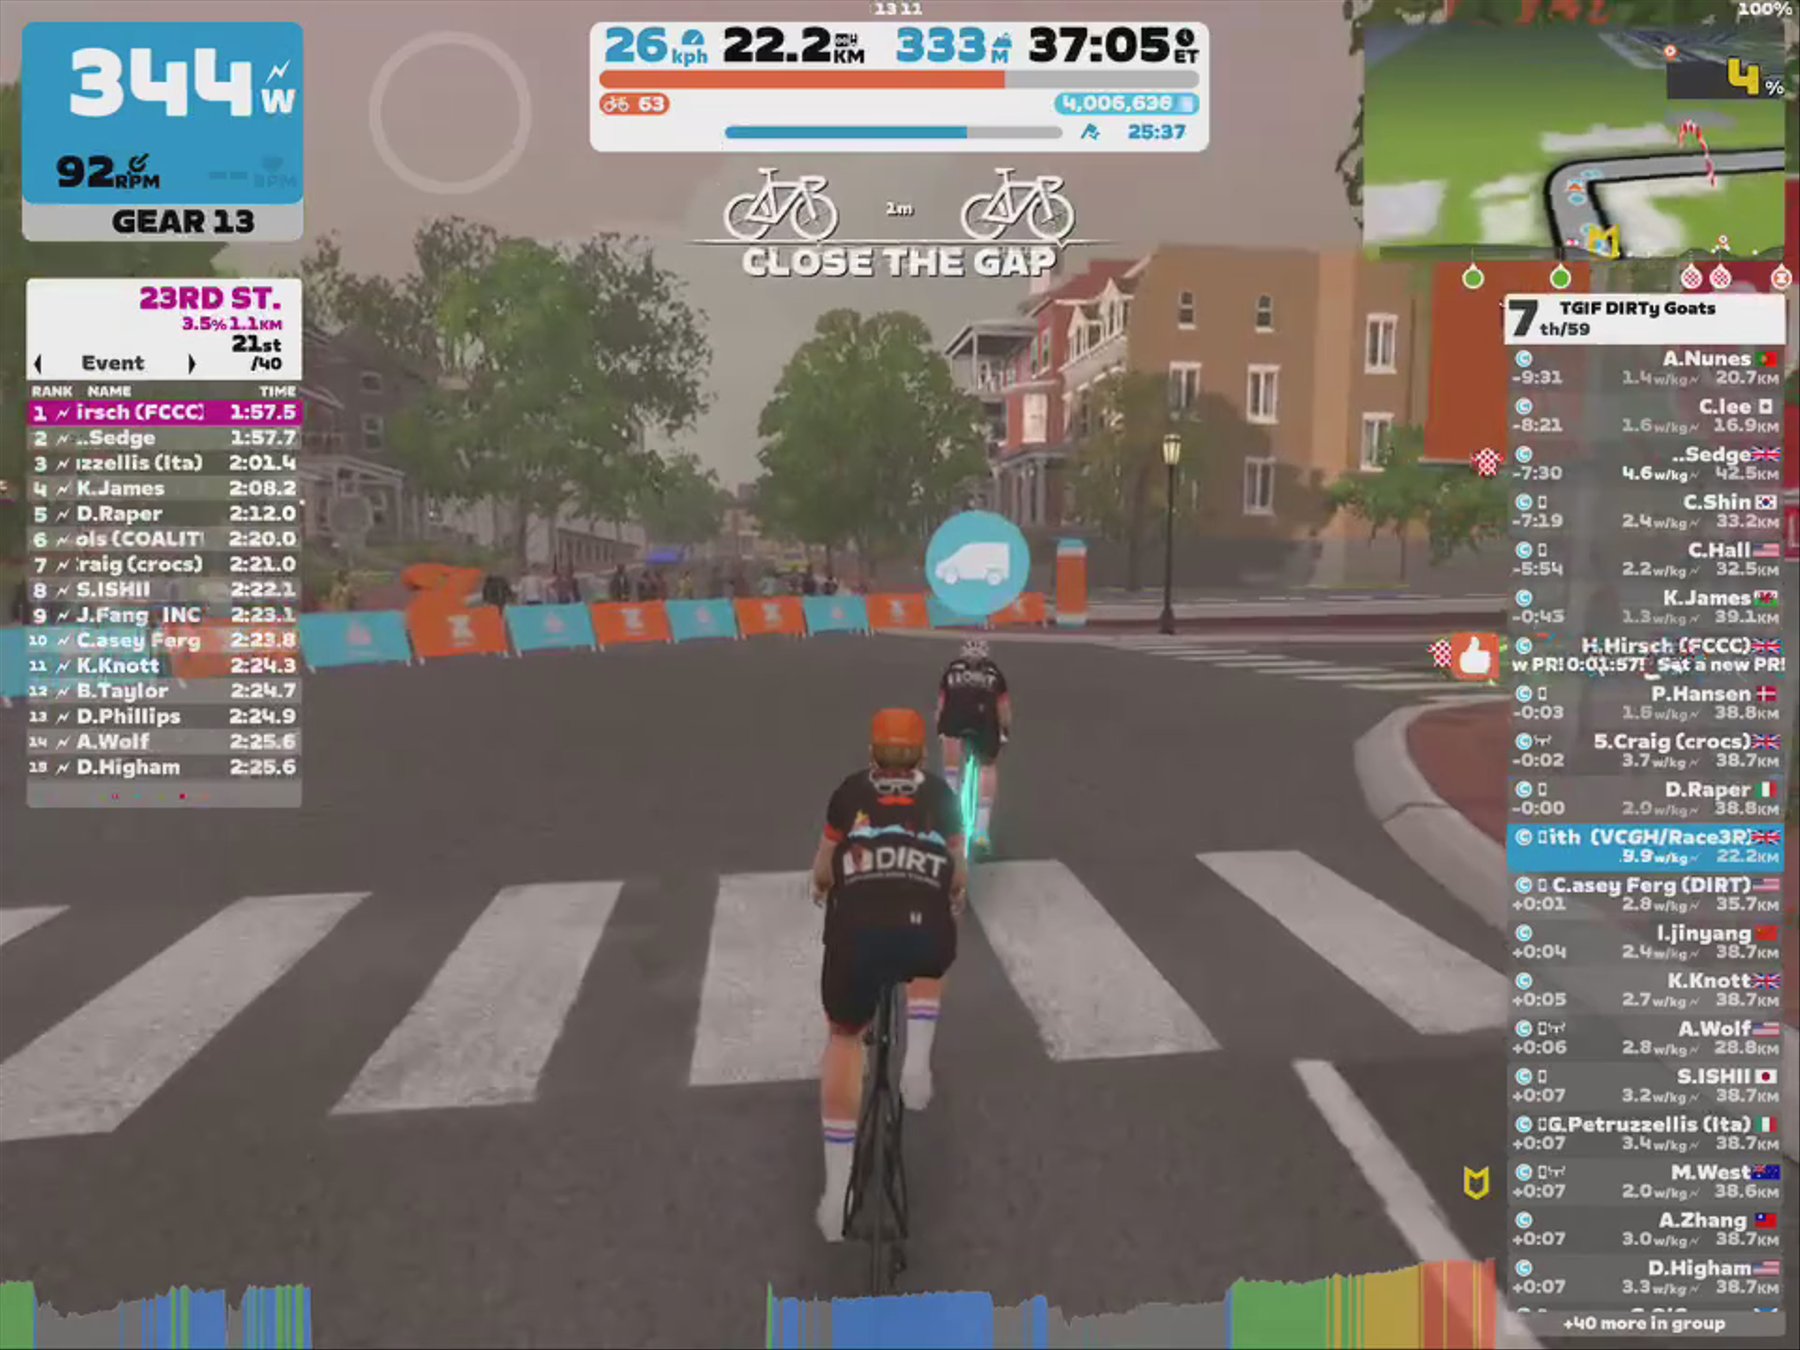 Zwift - Group Ride: TGIF DIRTy Goats (C) on Cobbled Climbs Reverse in Richmond